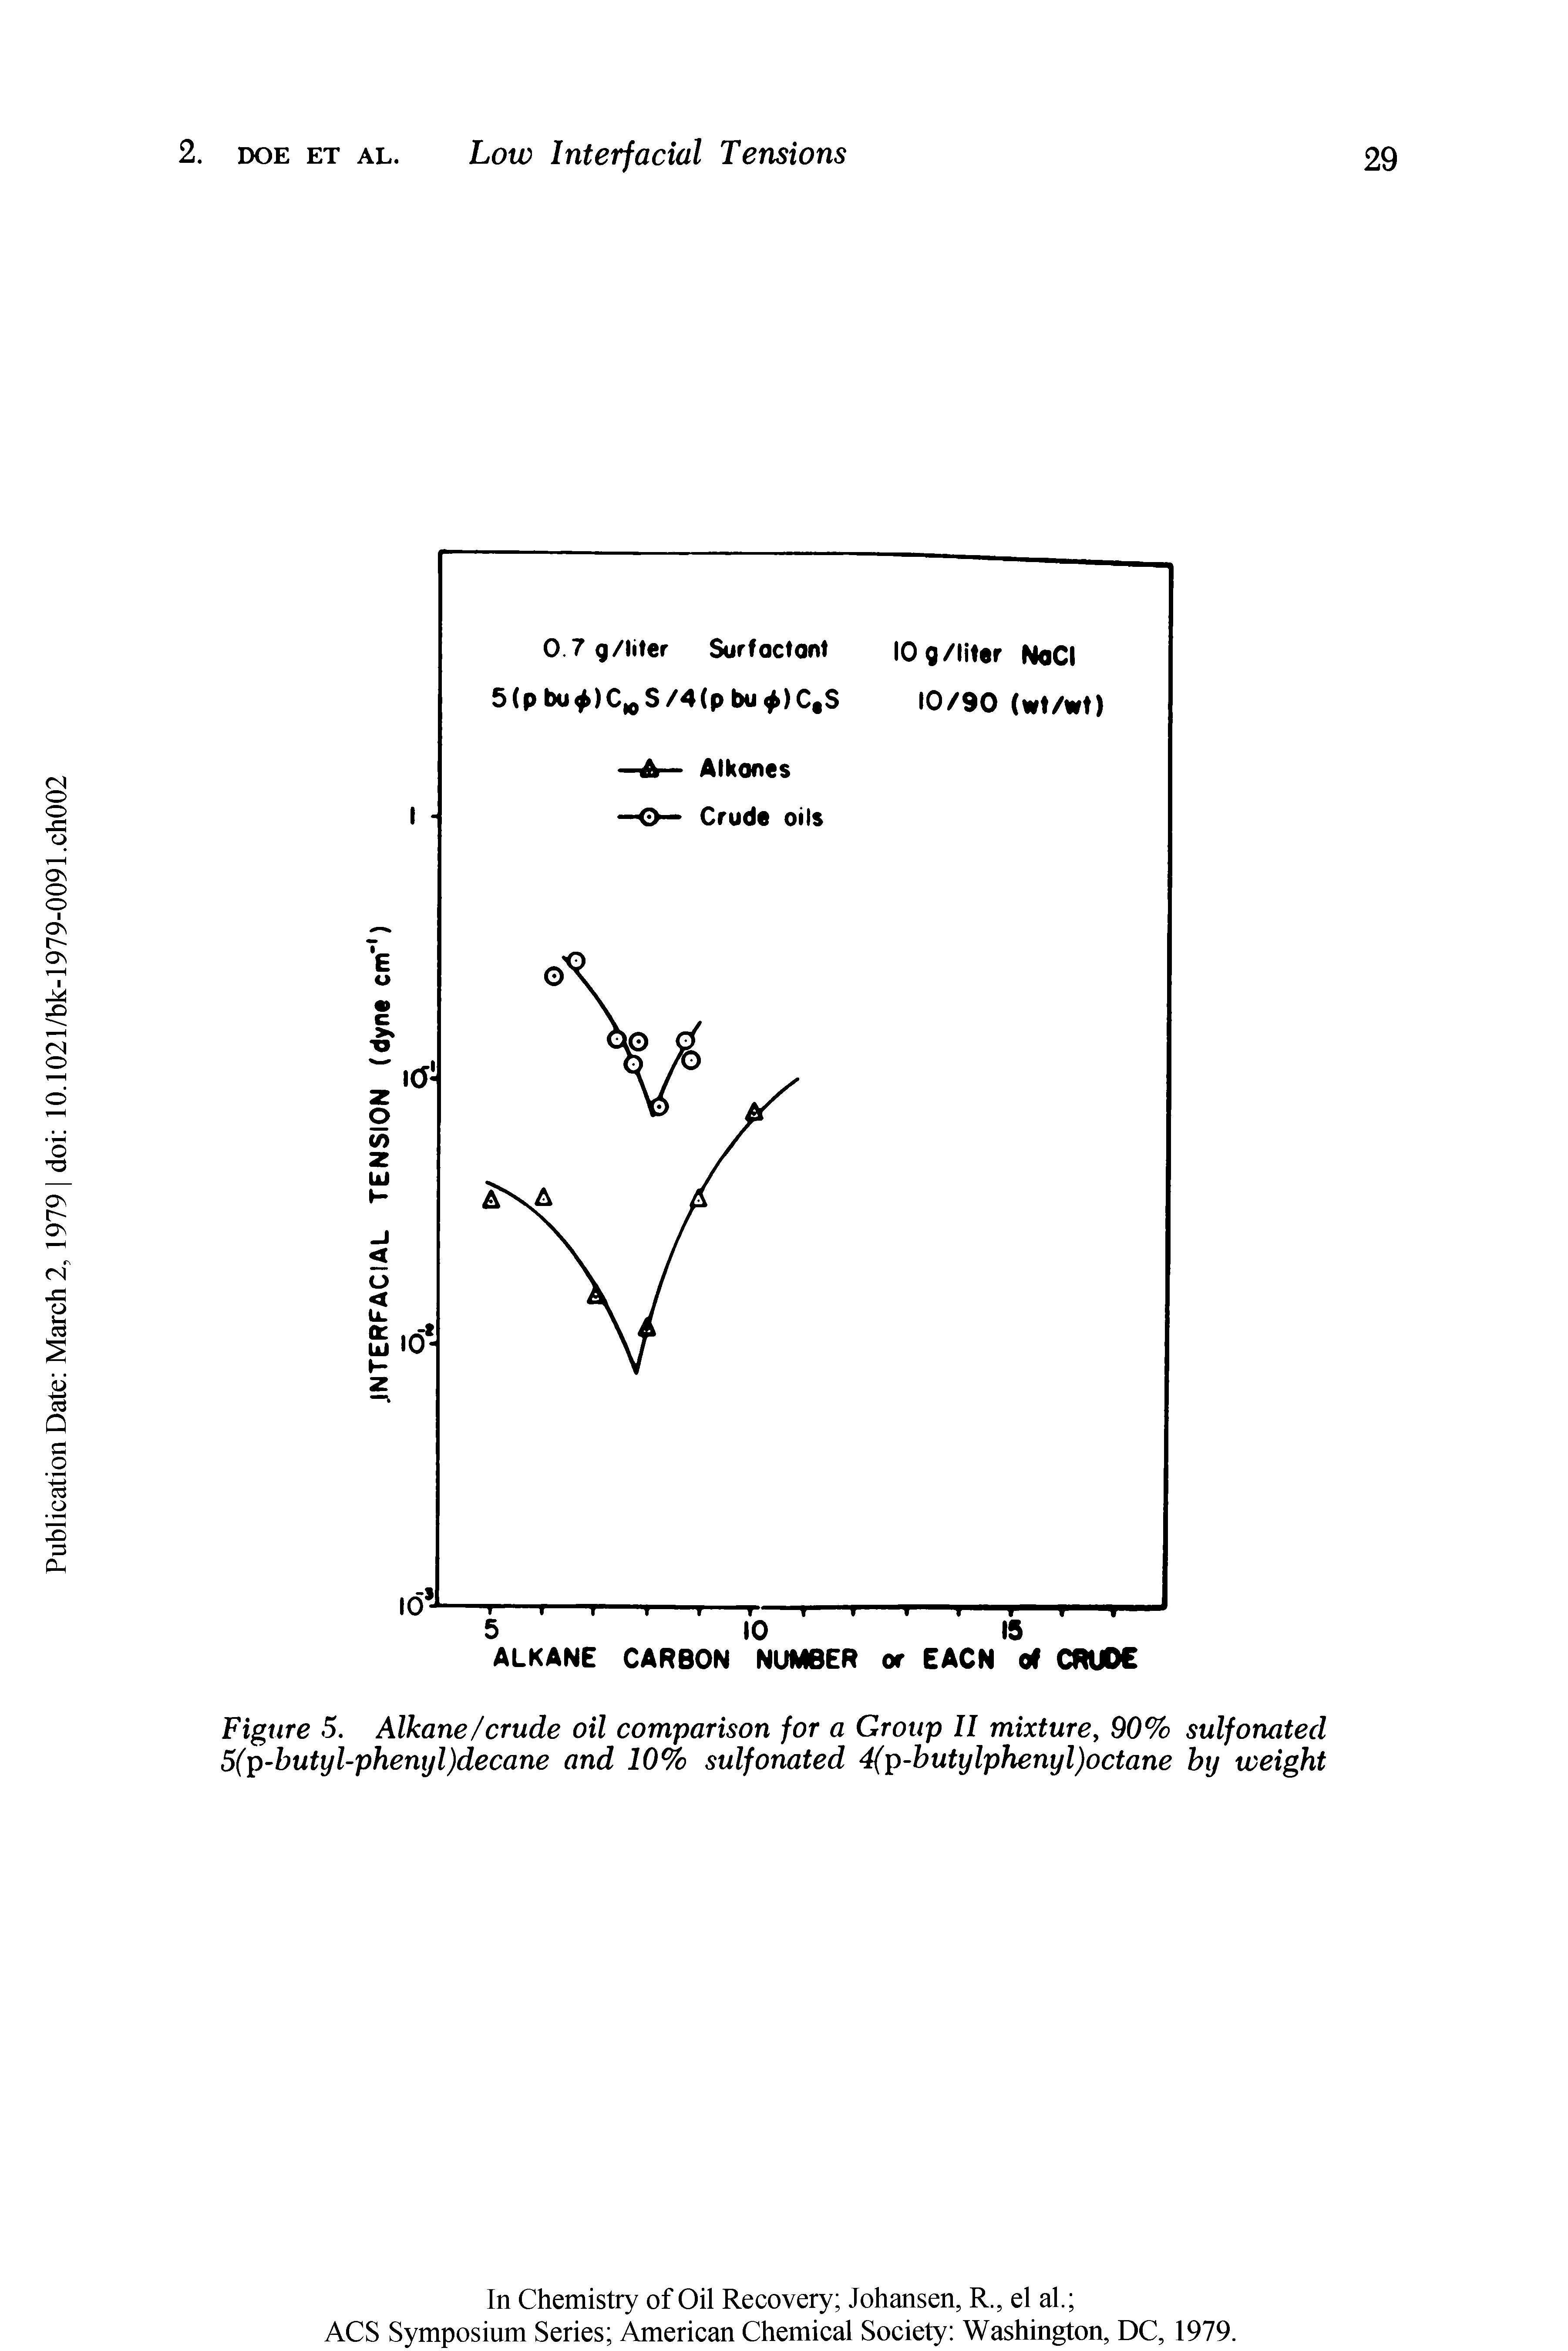 Figure 5. Alkane/crude oil comparison for a Group II mixture, 90% sulfonated 5(p-butyl-phentjl)decane and 10% sulfonated 4(p-butylphenyl)octane by weight...